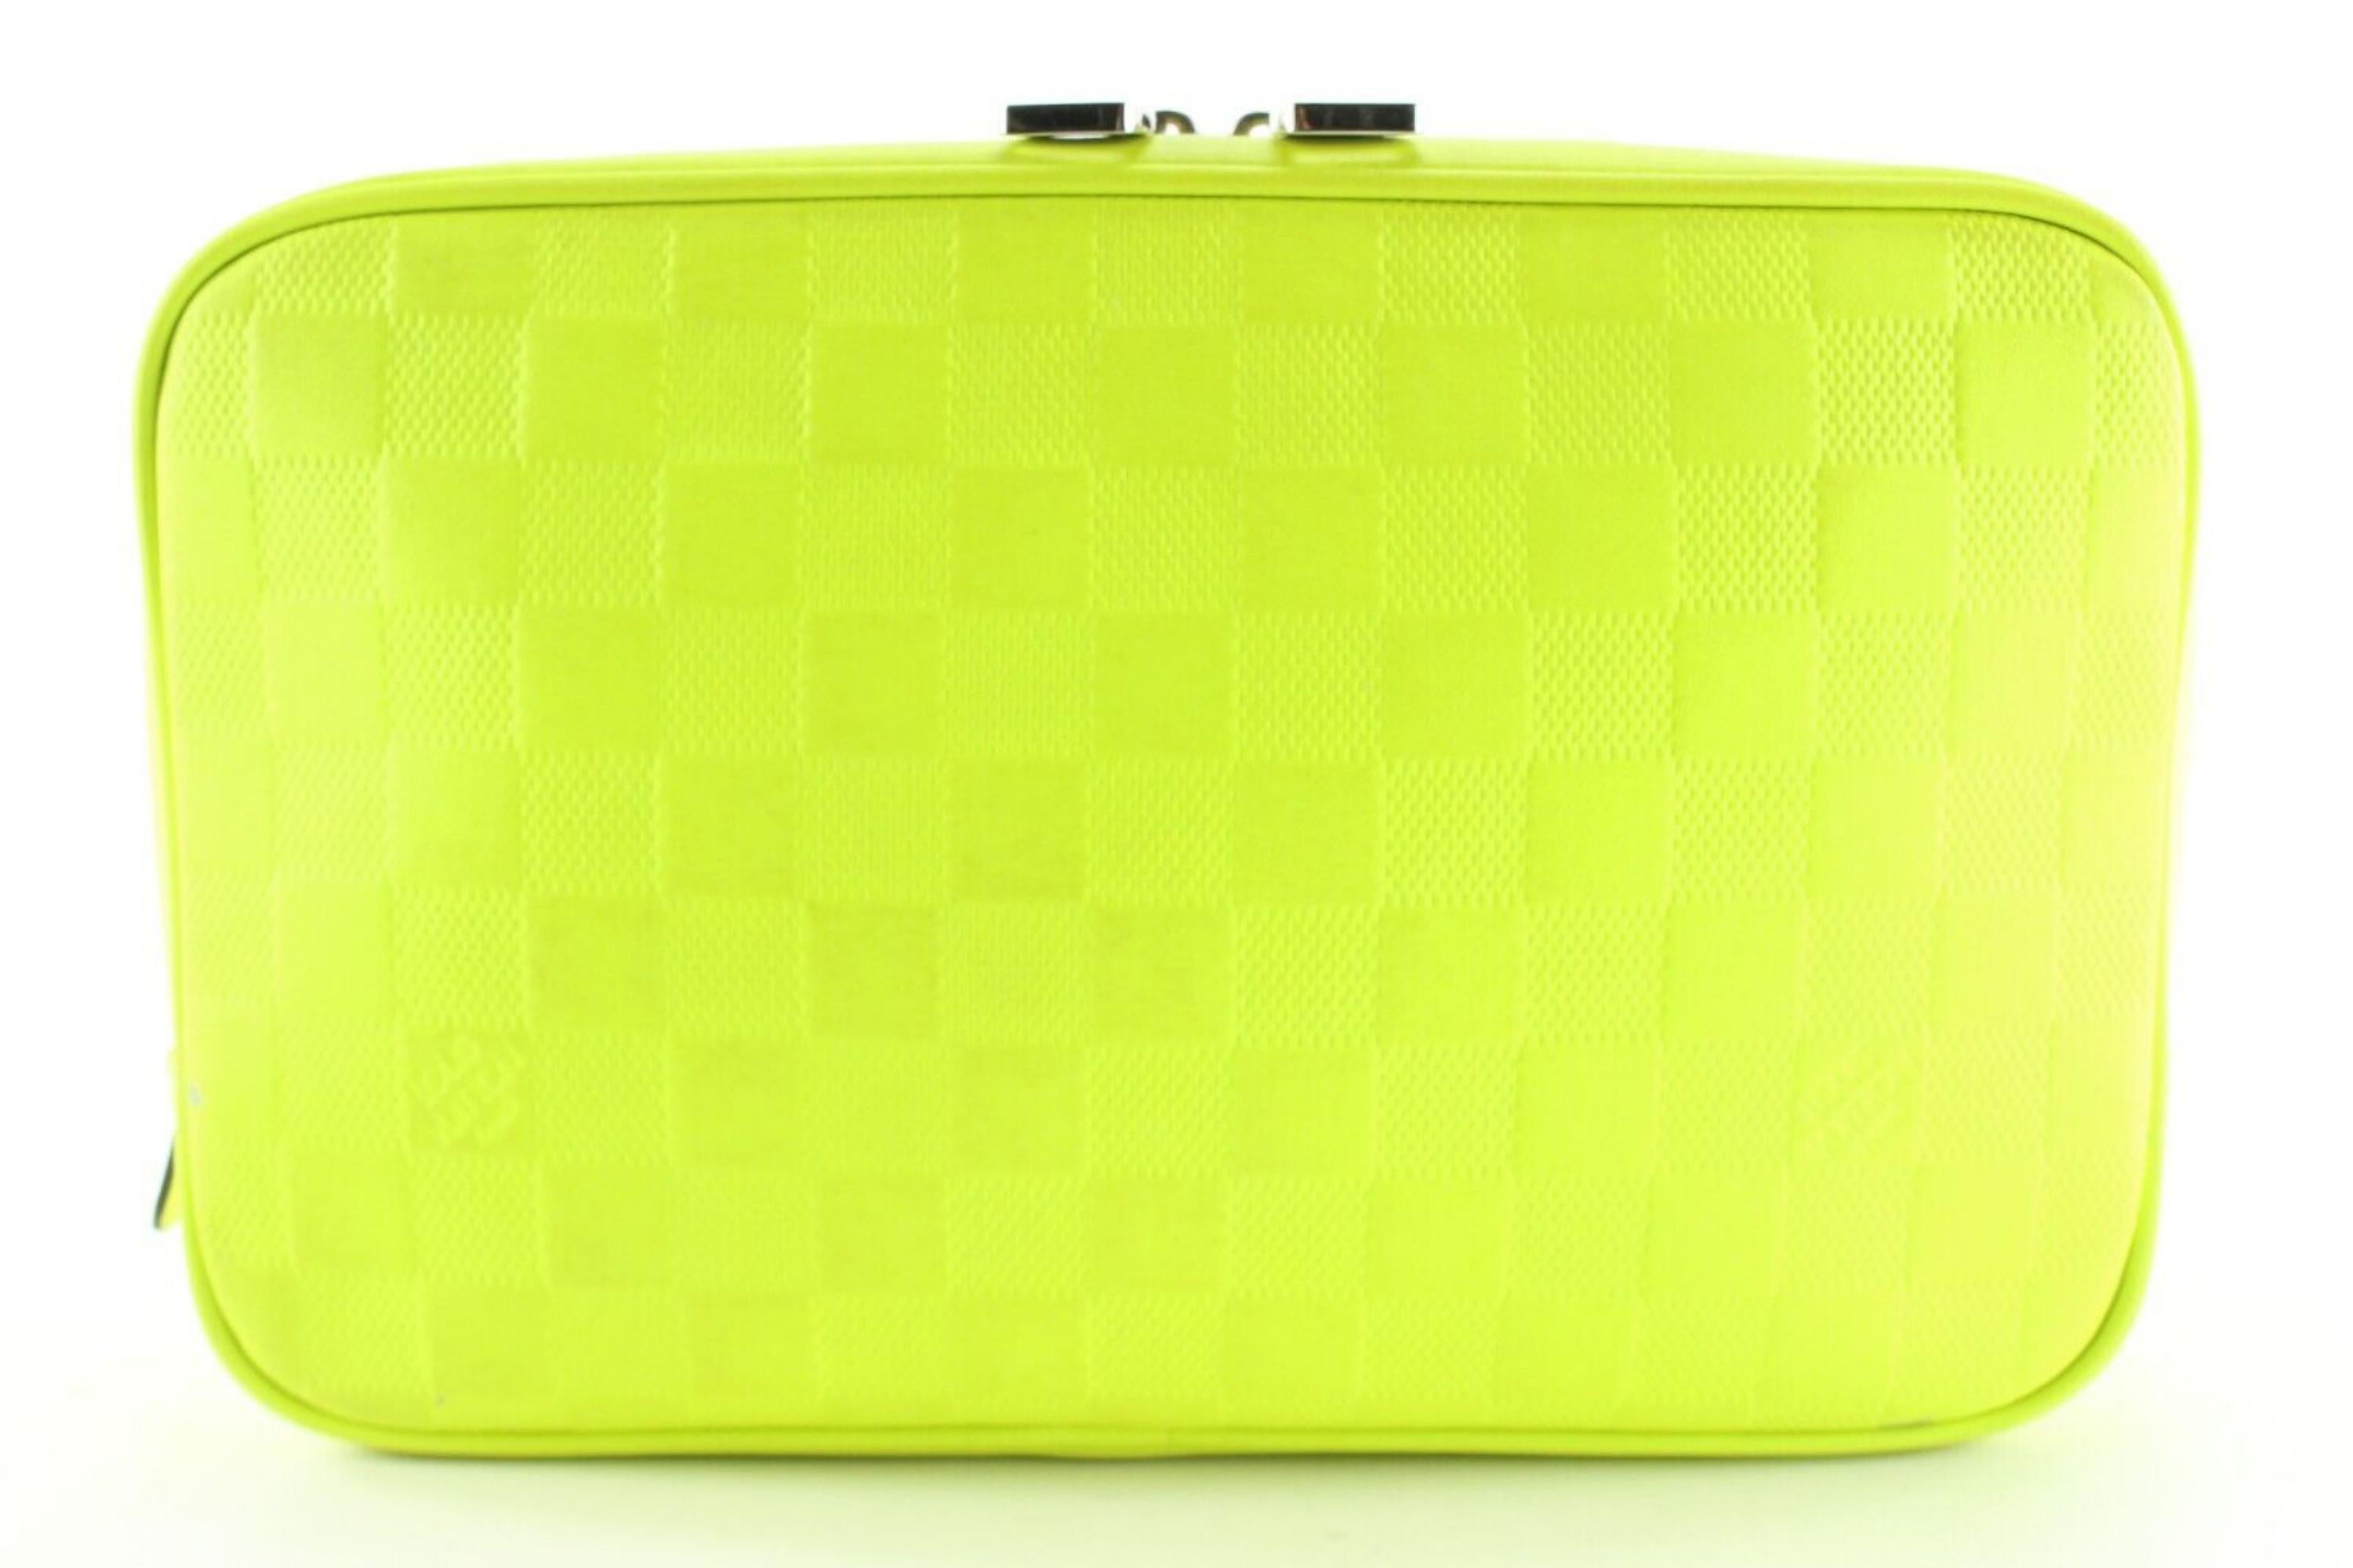 Louis Vuitton Neon Green Damier Infini Leather Trousse Cosmetic Pouch 5LK0223 For Sale 4